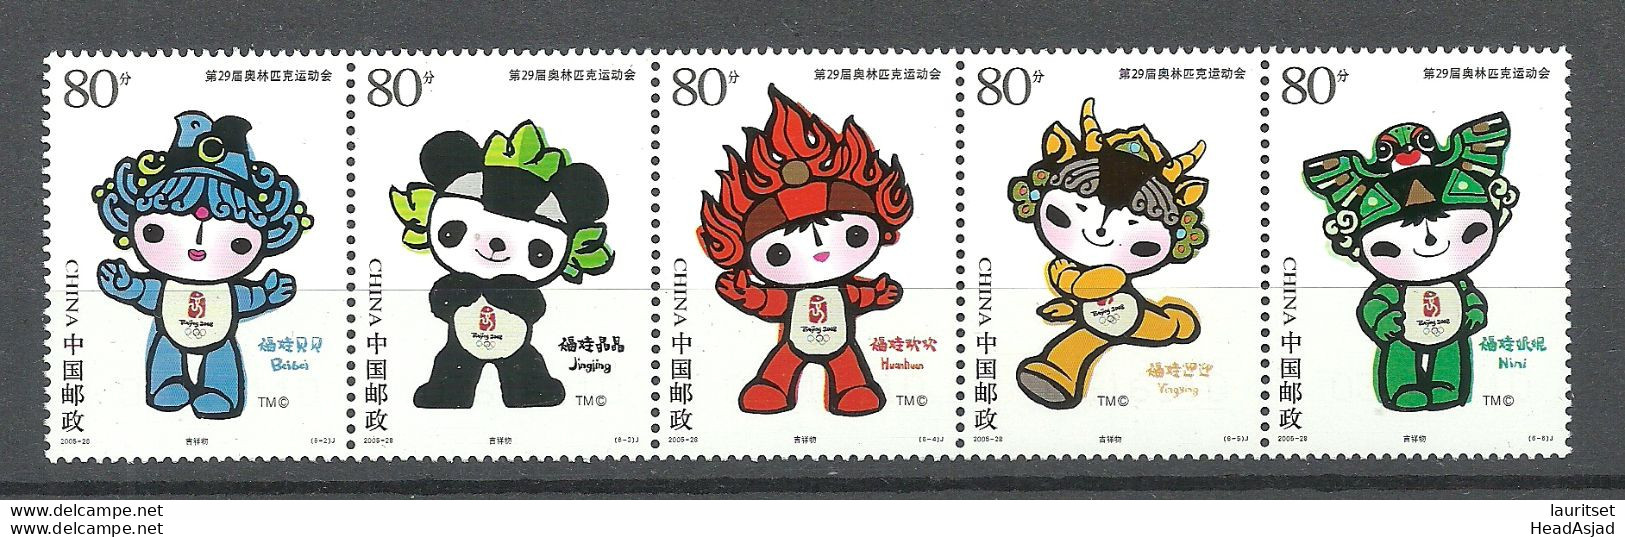 CHINA 2005 Michel 3703 - 3708 MNH Olympic Games Bejing Mascot 5-stripe - Unused Stamps